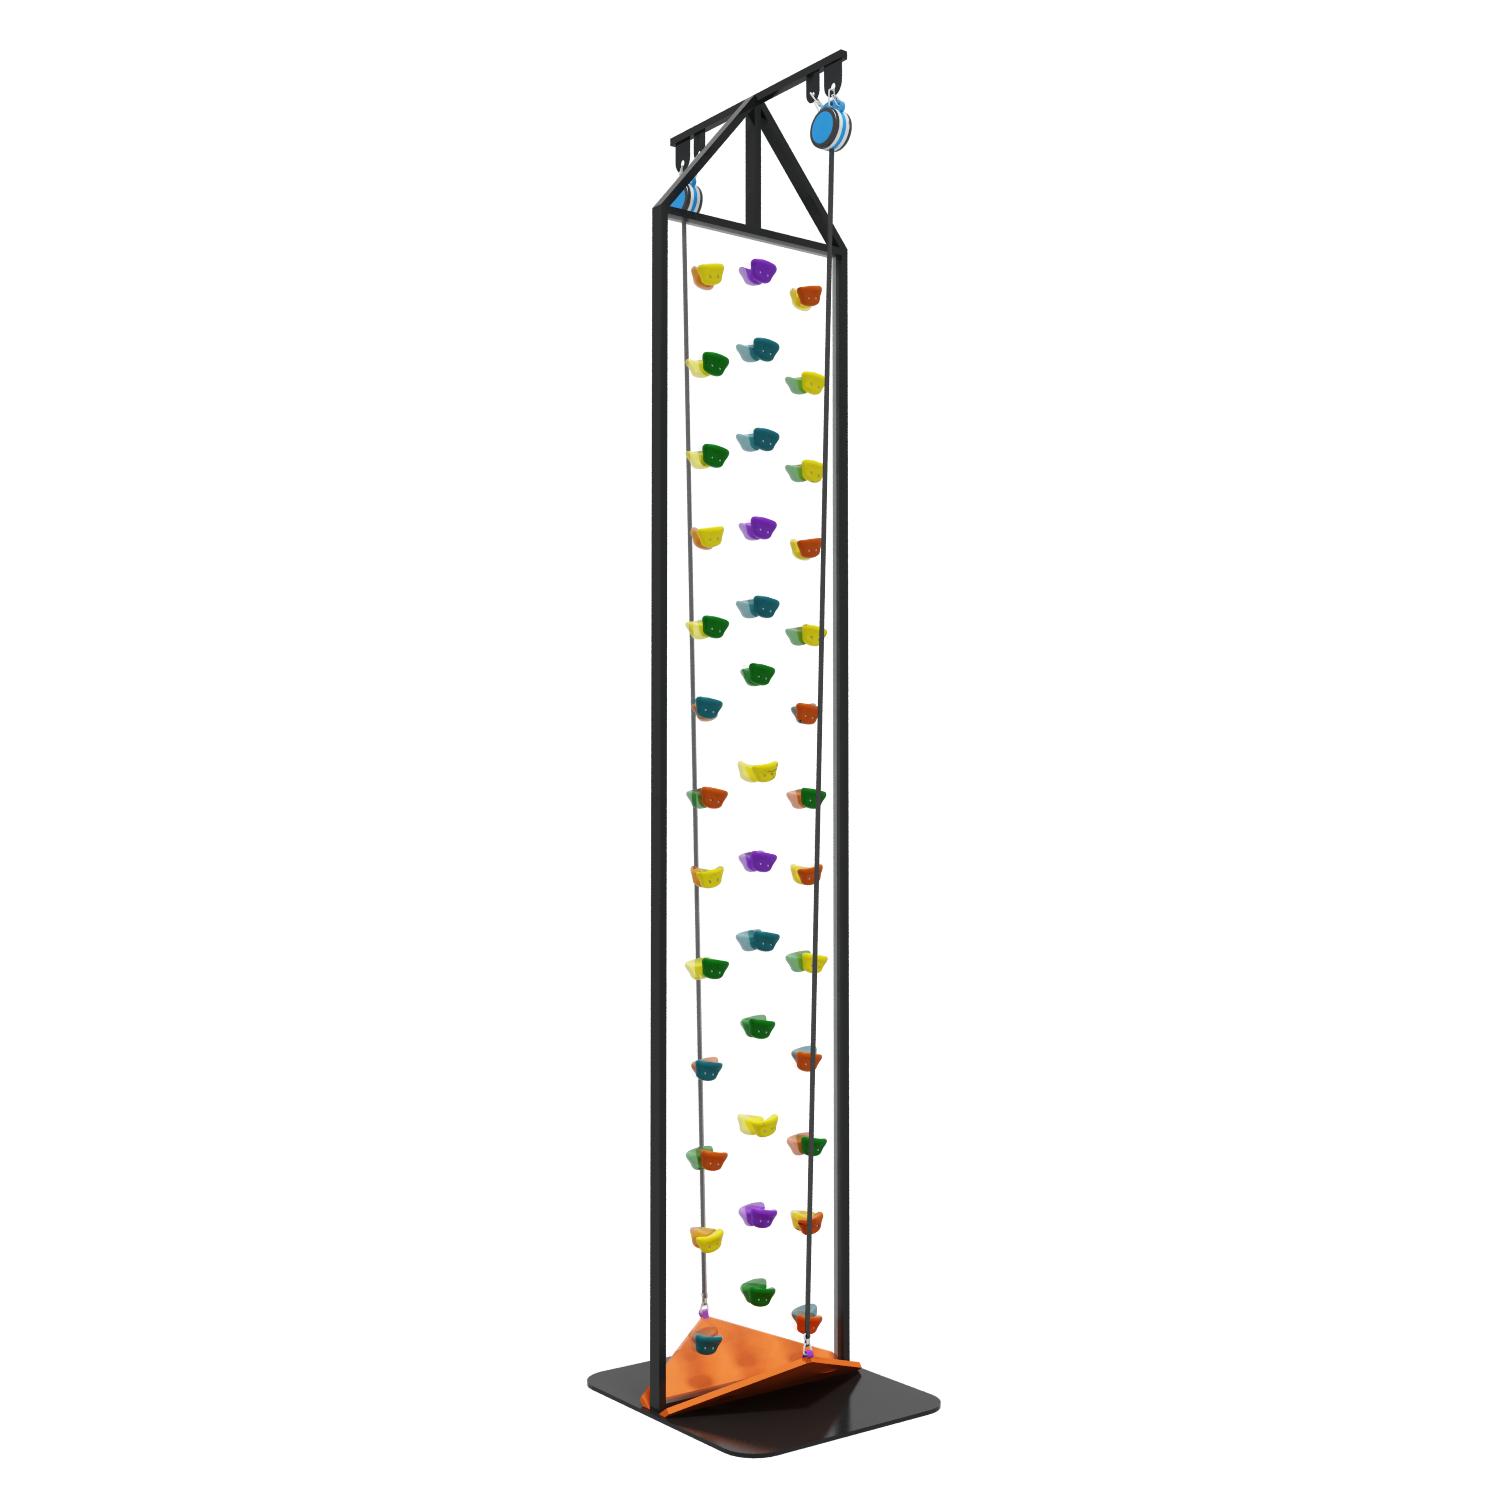 Frame Climbing Wall With Tires